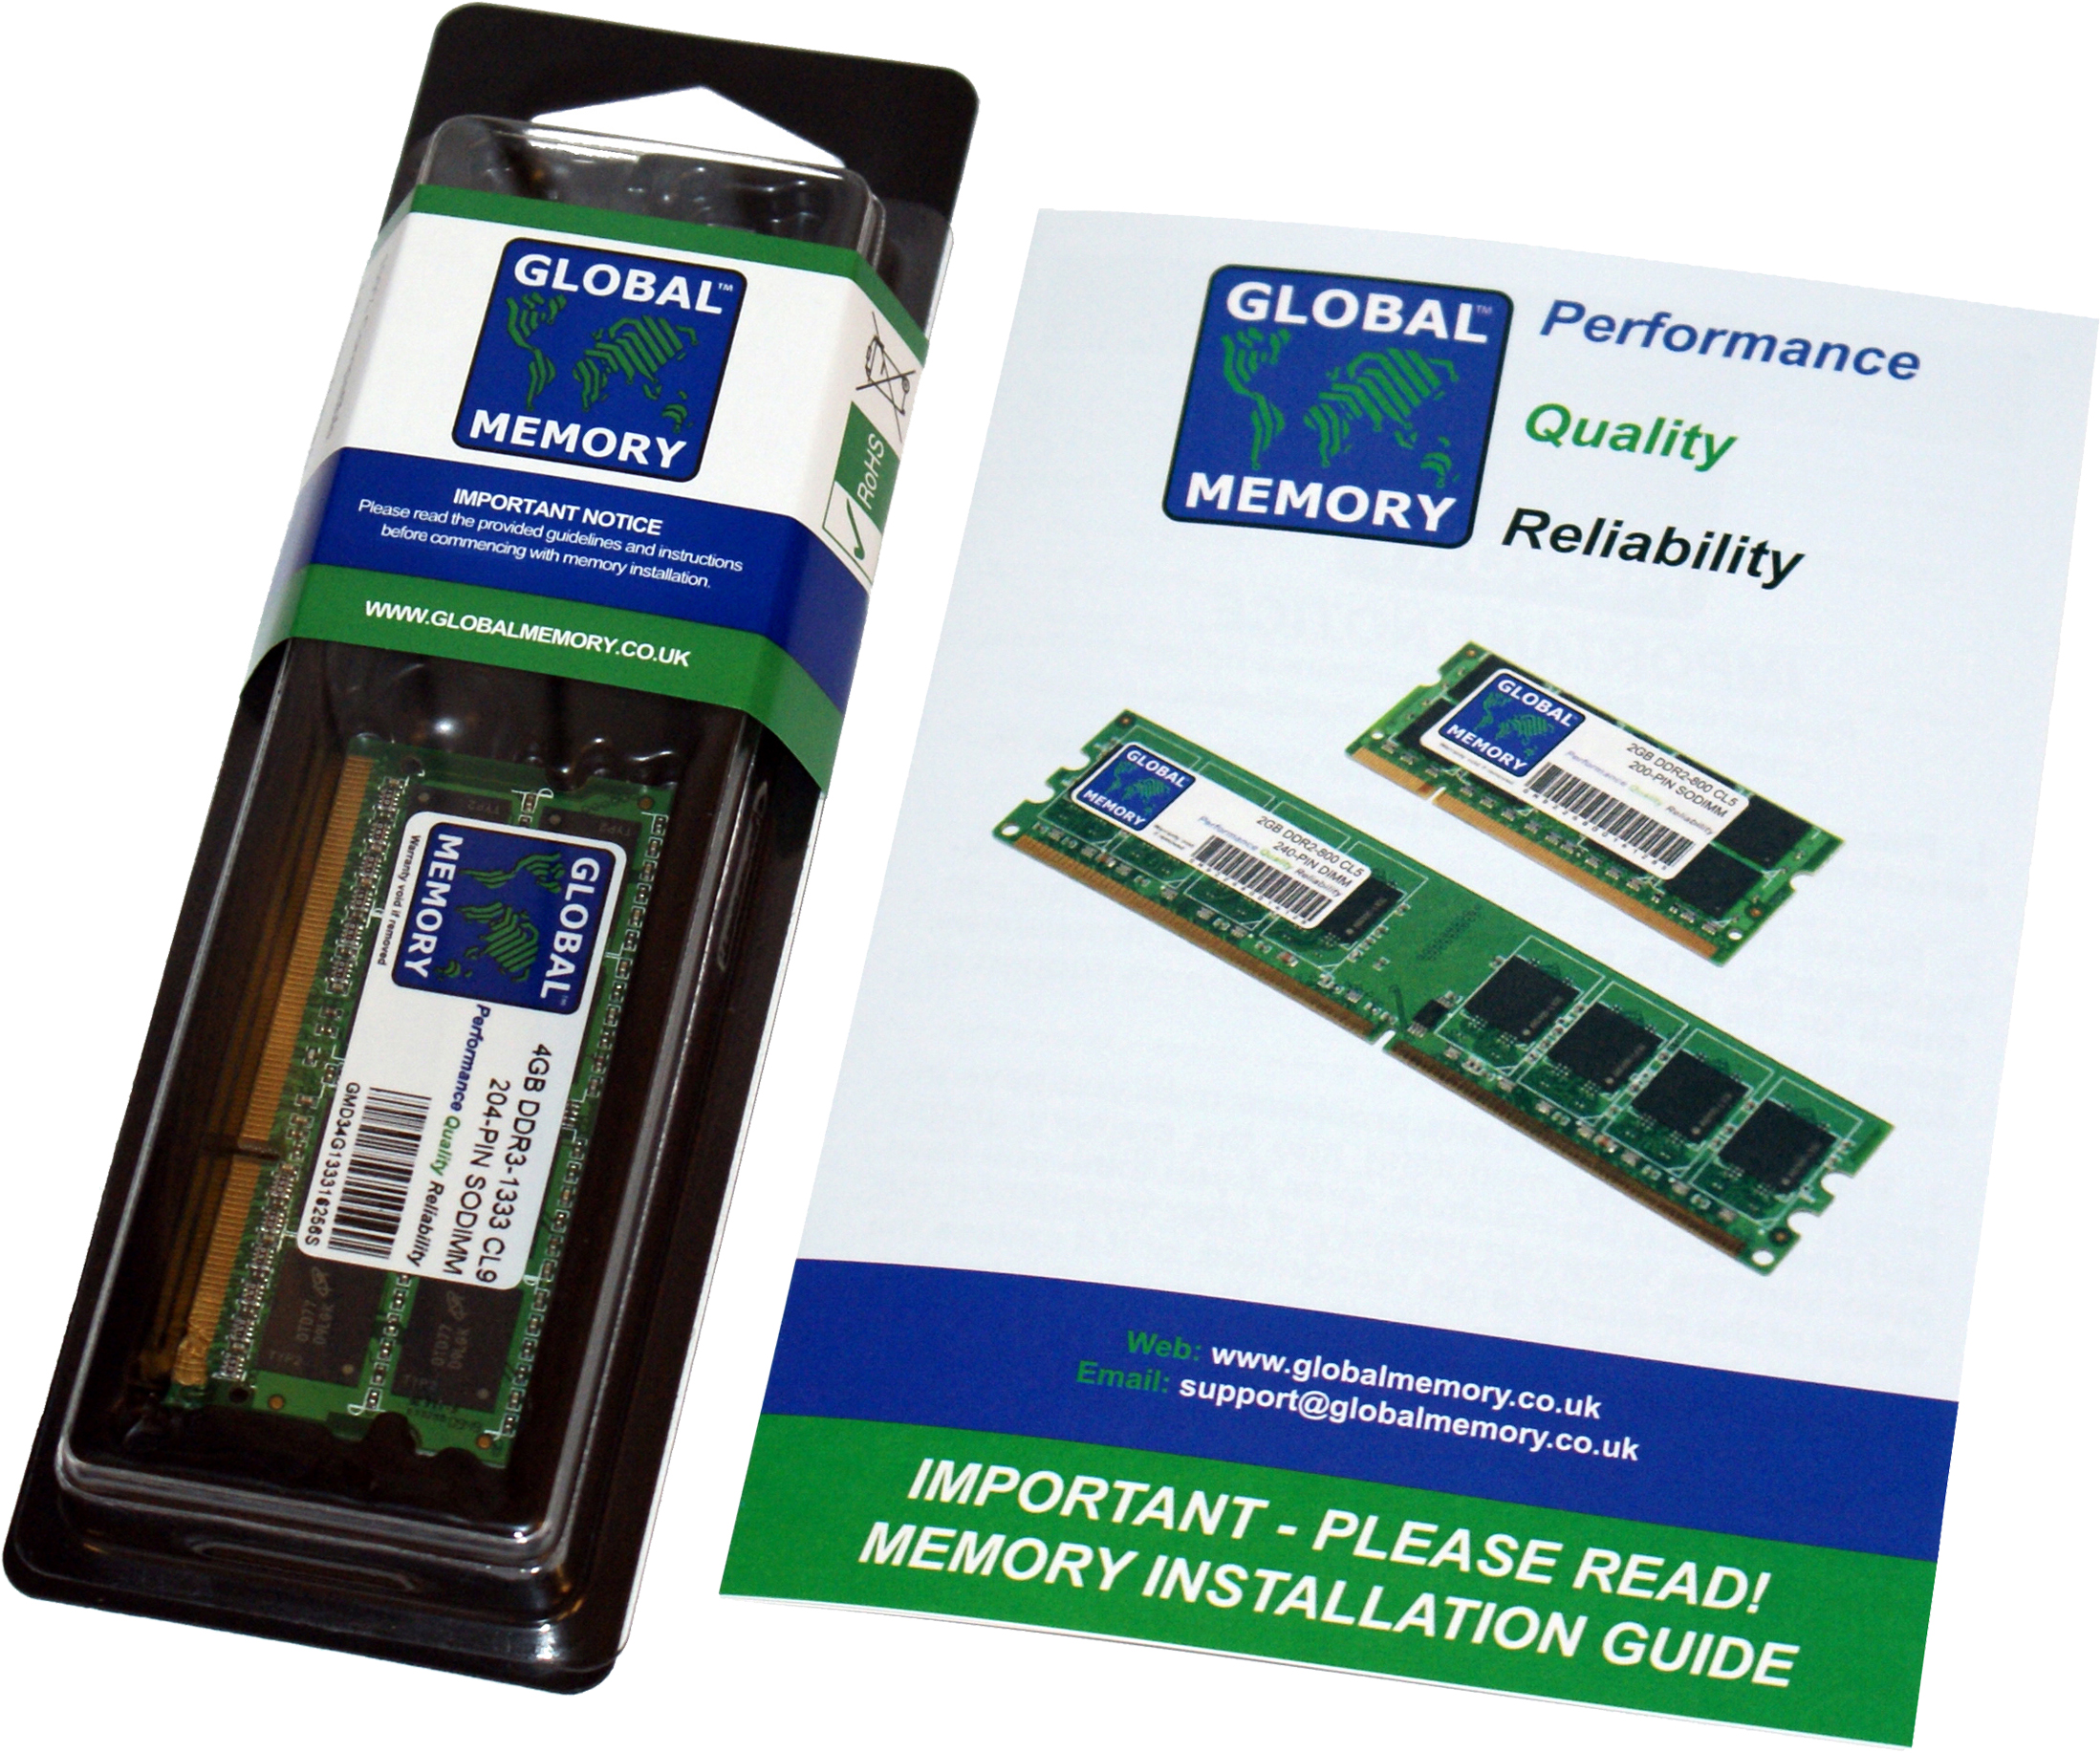 16GB DDR4 2666MHz PC4-21300 260-PIN SODIMM MEMORY RAM FOR PACKARD BELL LAPTOPS/NOTEBOOKS